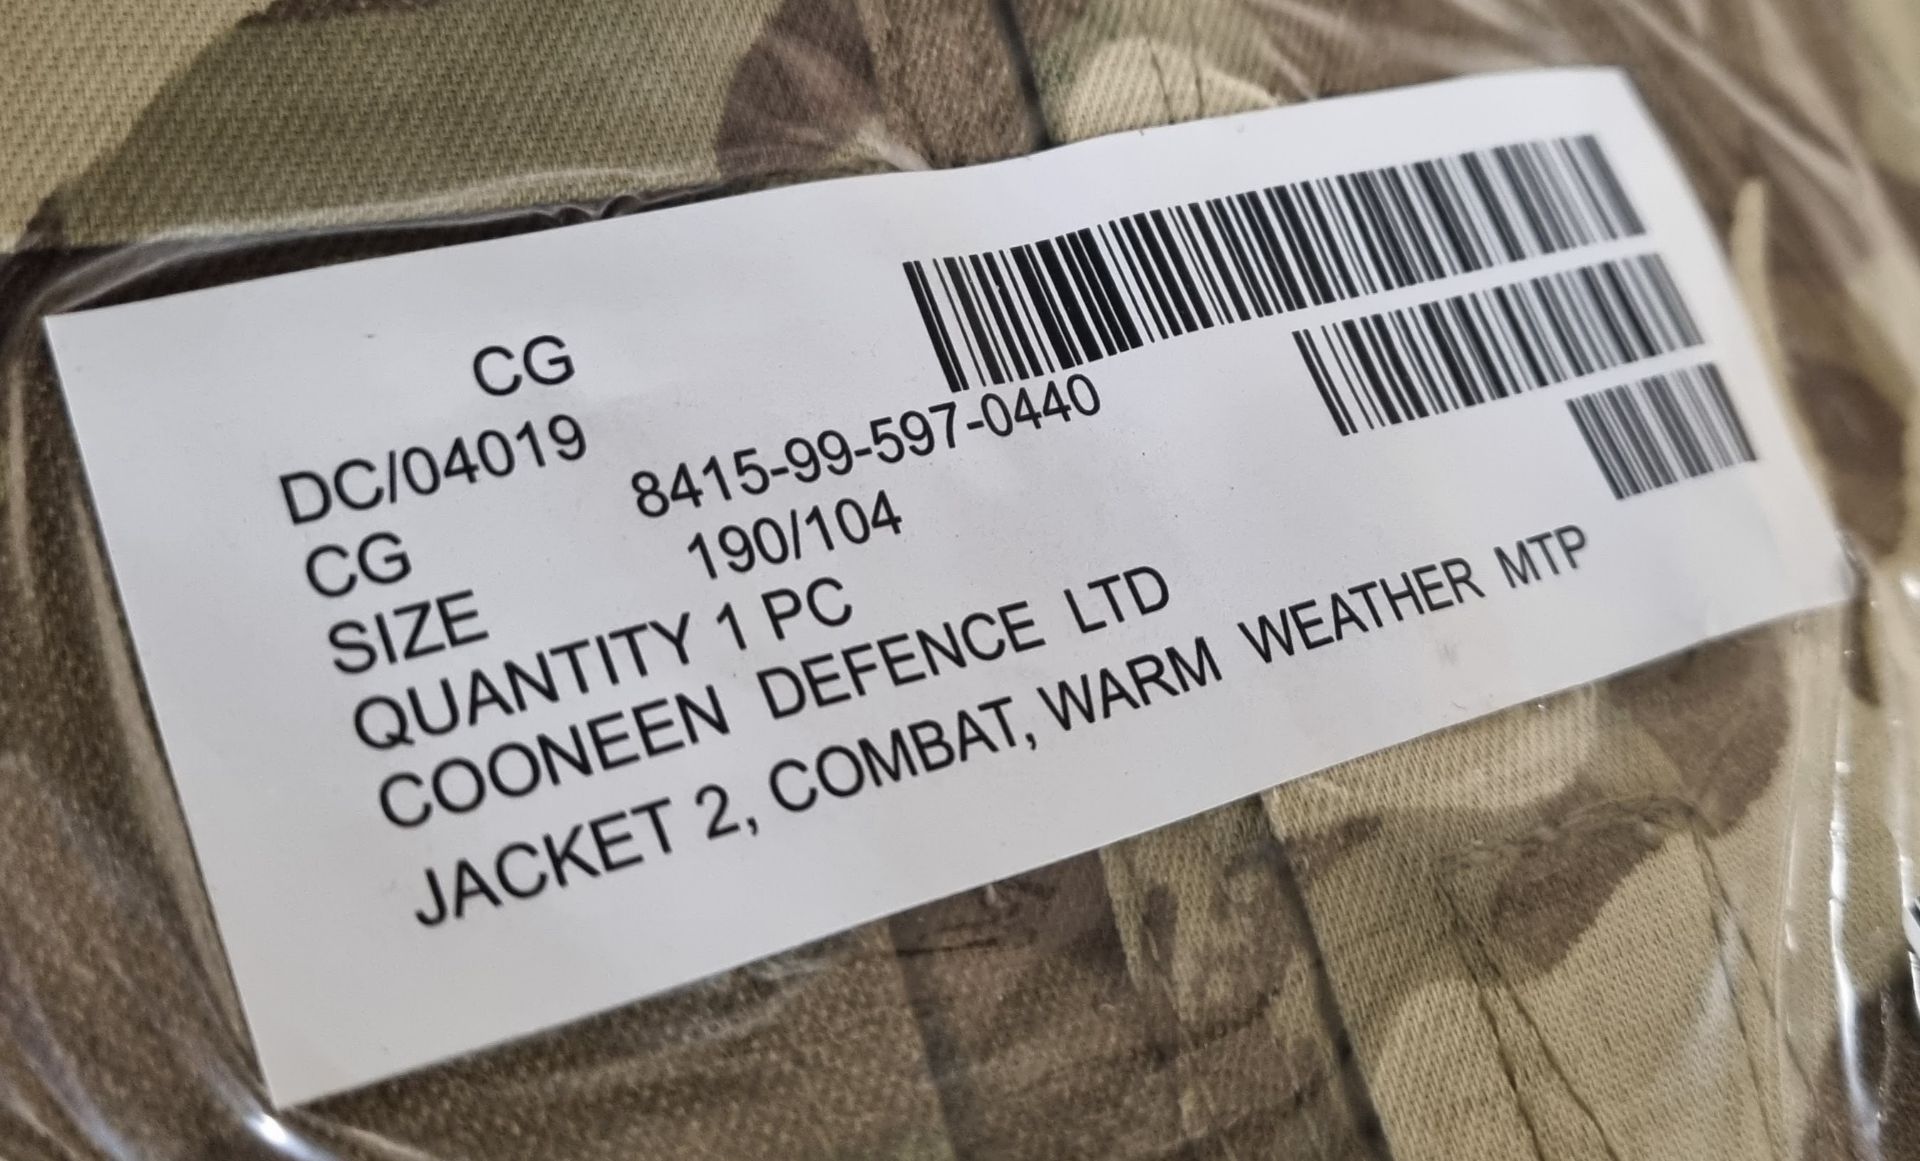 5x British Army MTP combat jackets 2 warm weather - new / packaged - Image 6 of 9